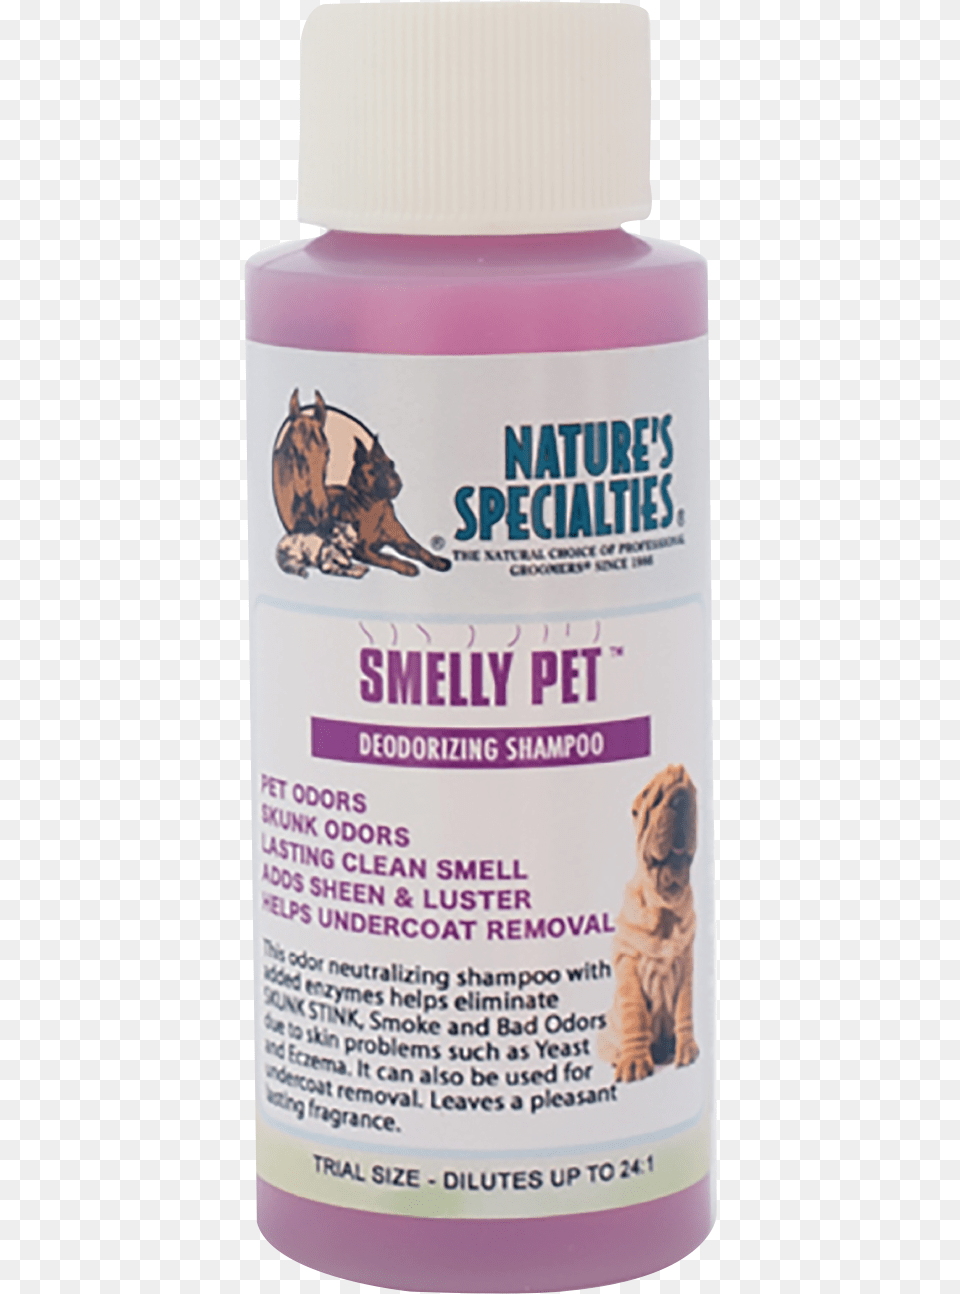 Smelly Pet Shampoo For Dogs Amp Catsdata Zoom Cdn, Herbal, Herbs, Plant, Bottle Free Transparent Png